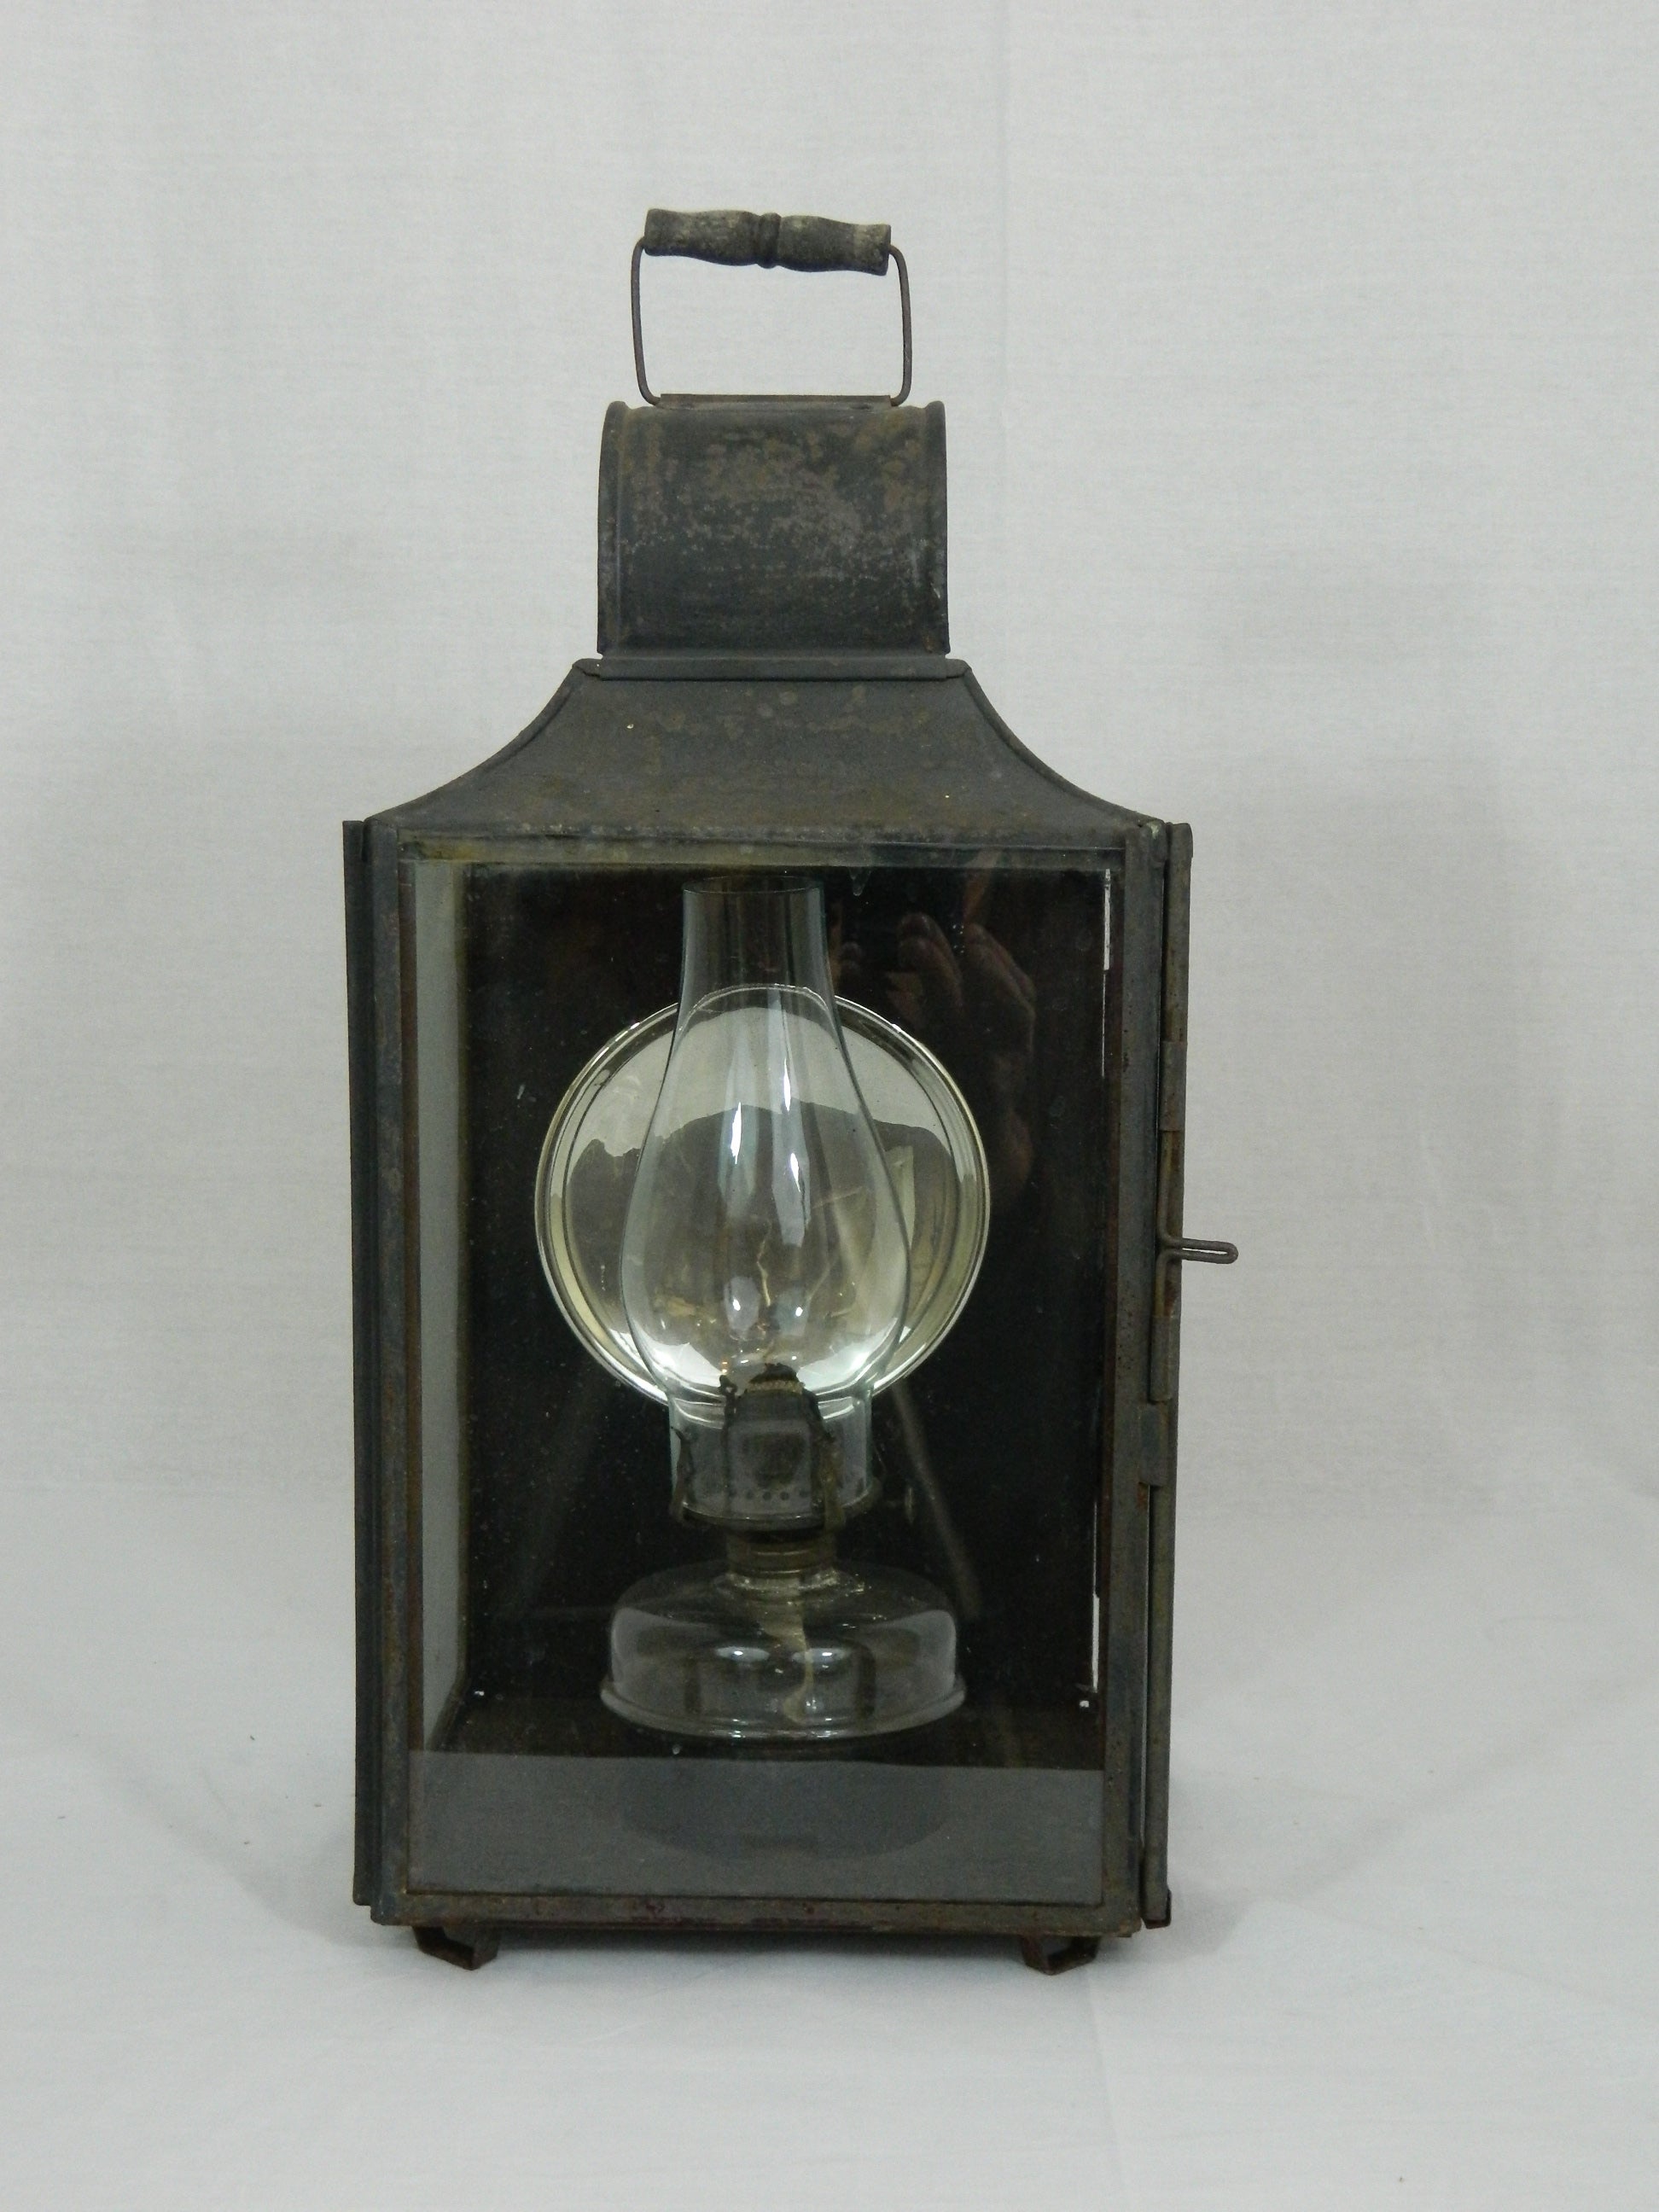 Carriage Gas Lantern with Mercury Glass Reflector